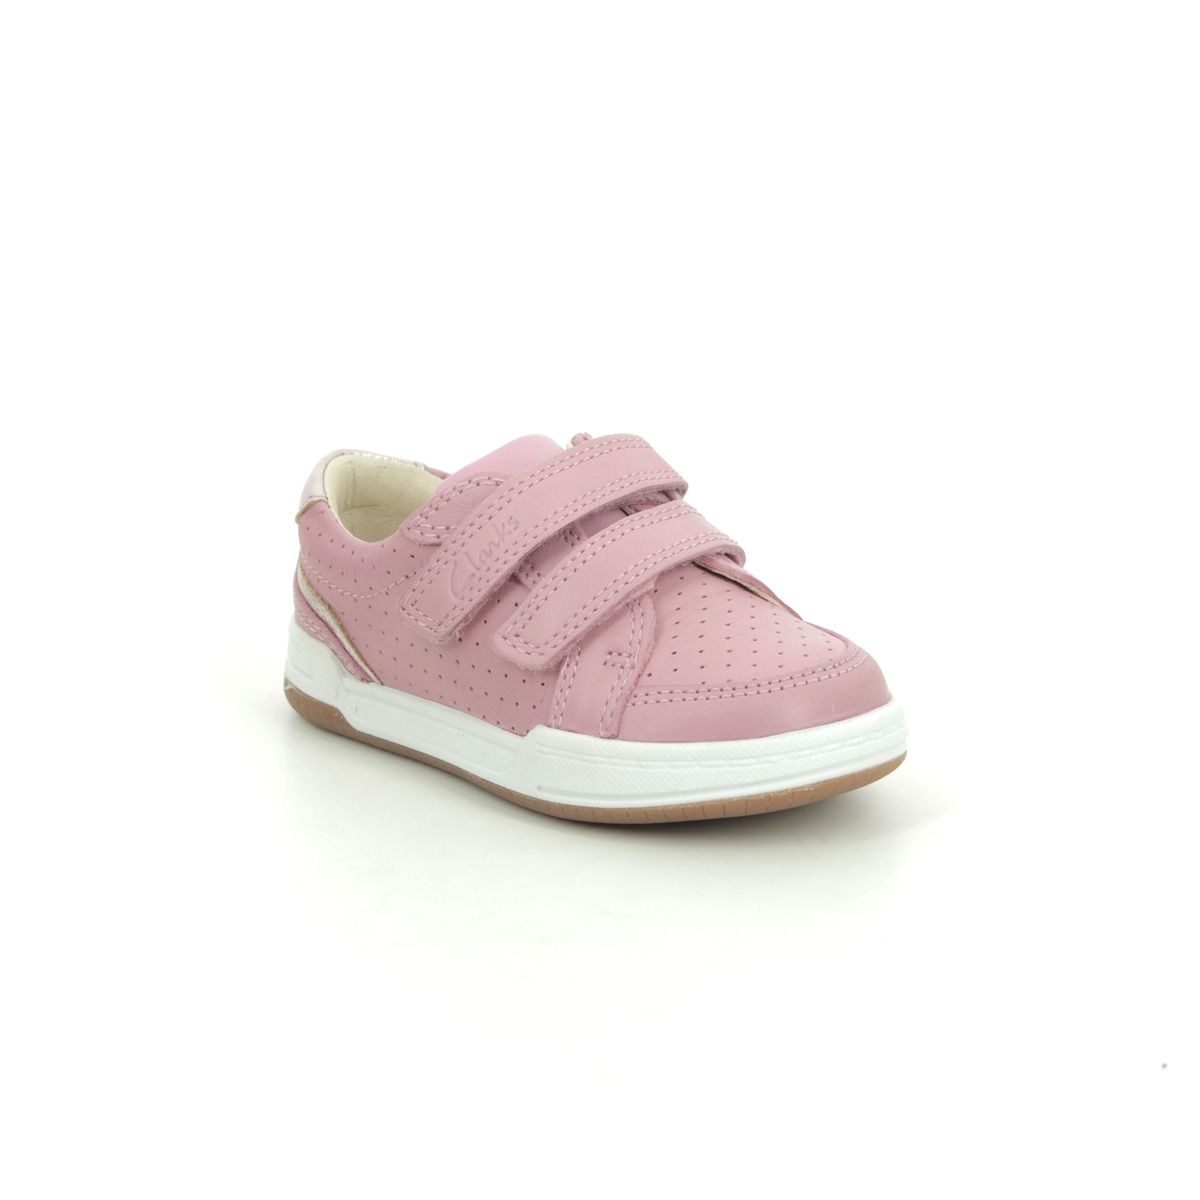 Clarks Fawn Solo T Pink Leather Kids First And Toddler 589897G In Size 5 In Plain Pink Leather G Width Fitting For kids